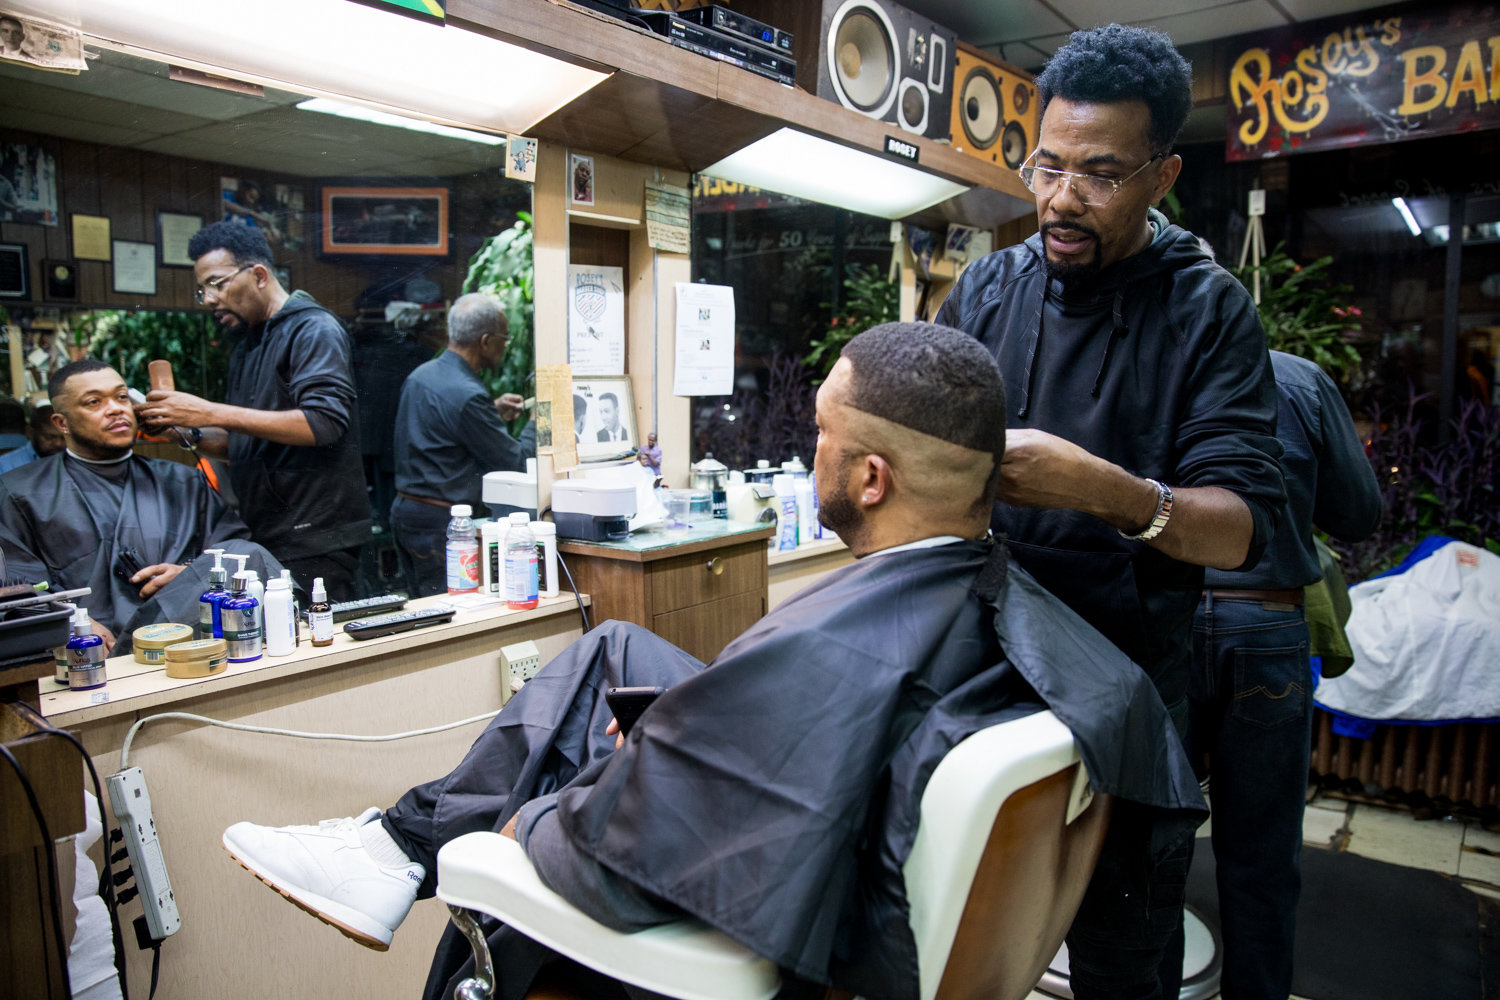 Garfield Myrie gives a haircut to Joe White at Marble Hill’s International Unisex Salon. White travels to the salon every two weeks from Washington.